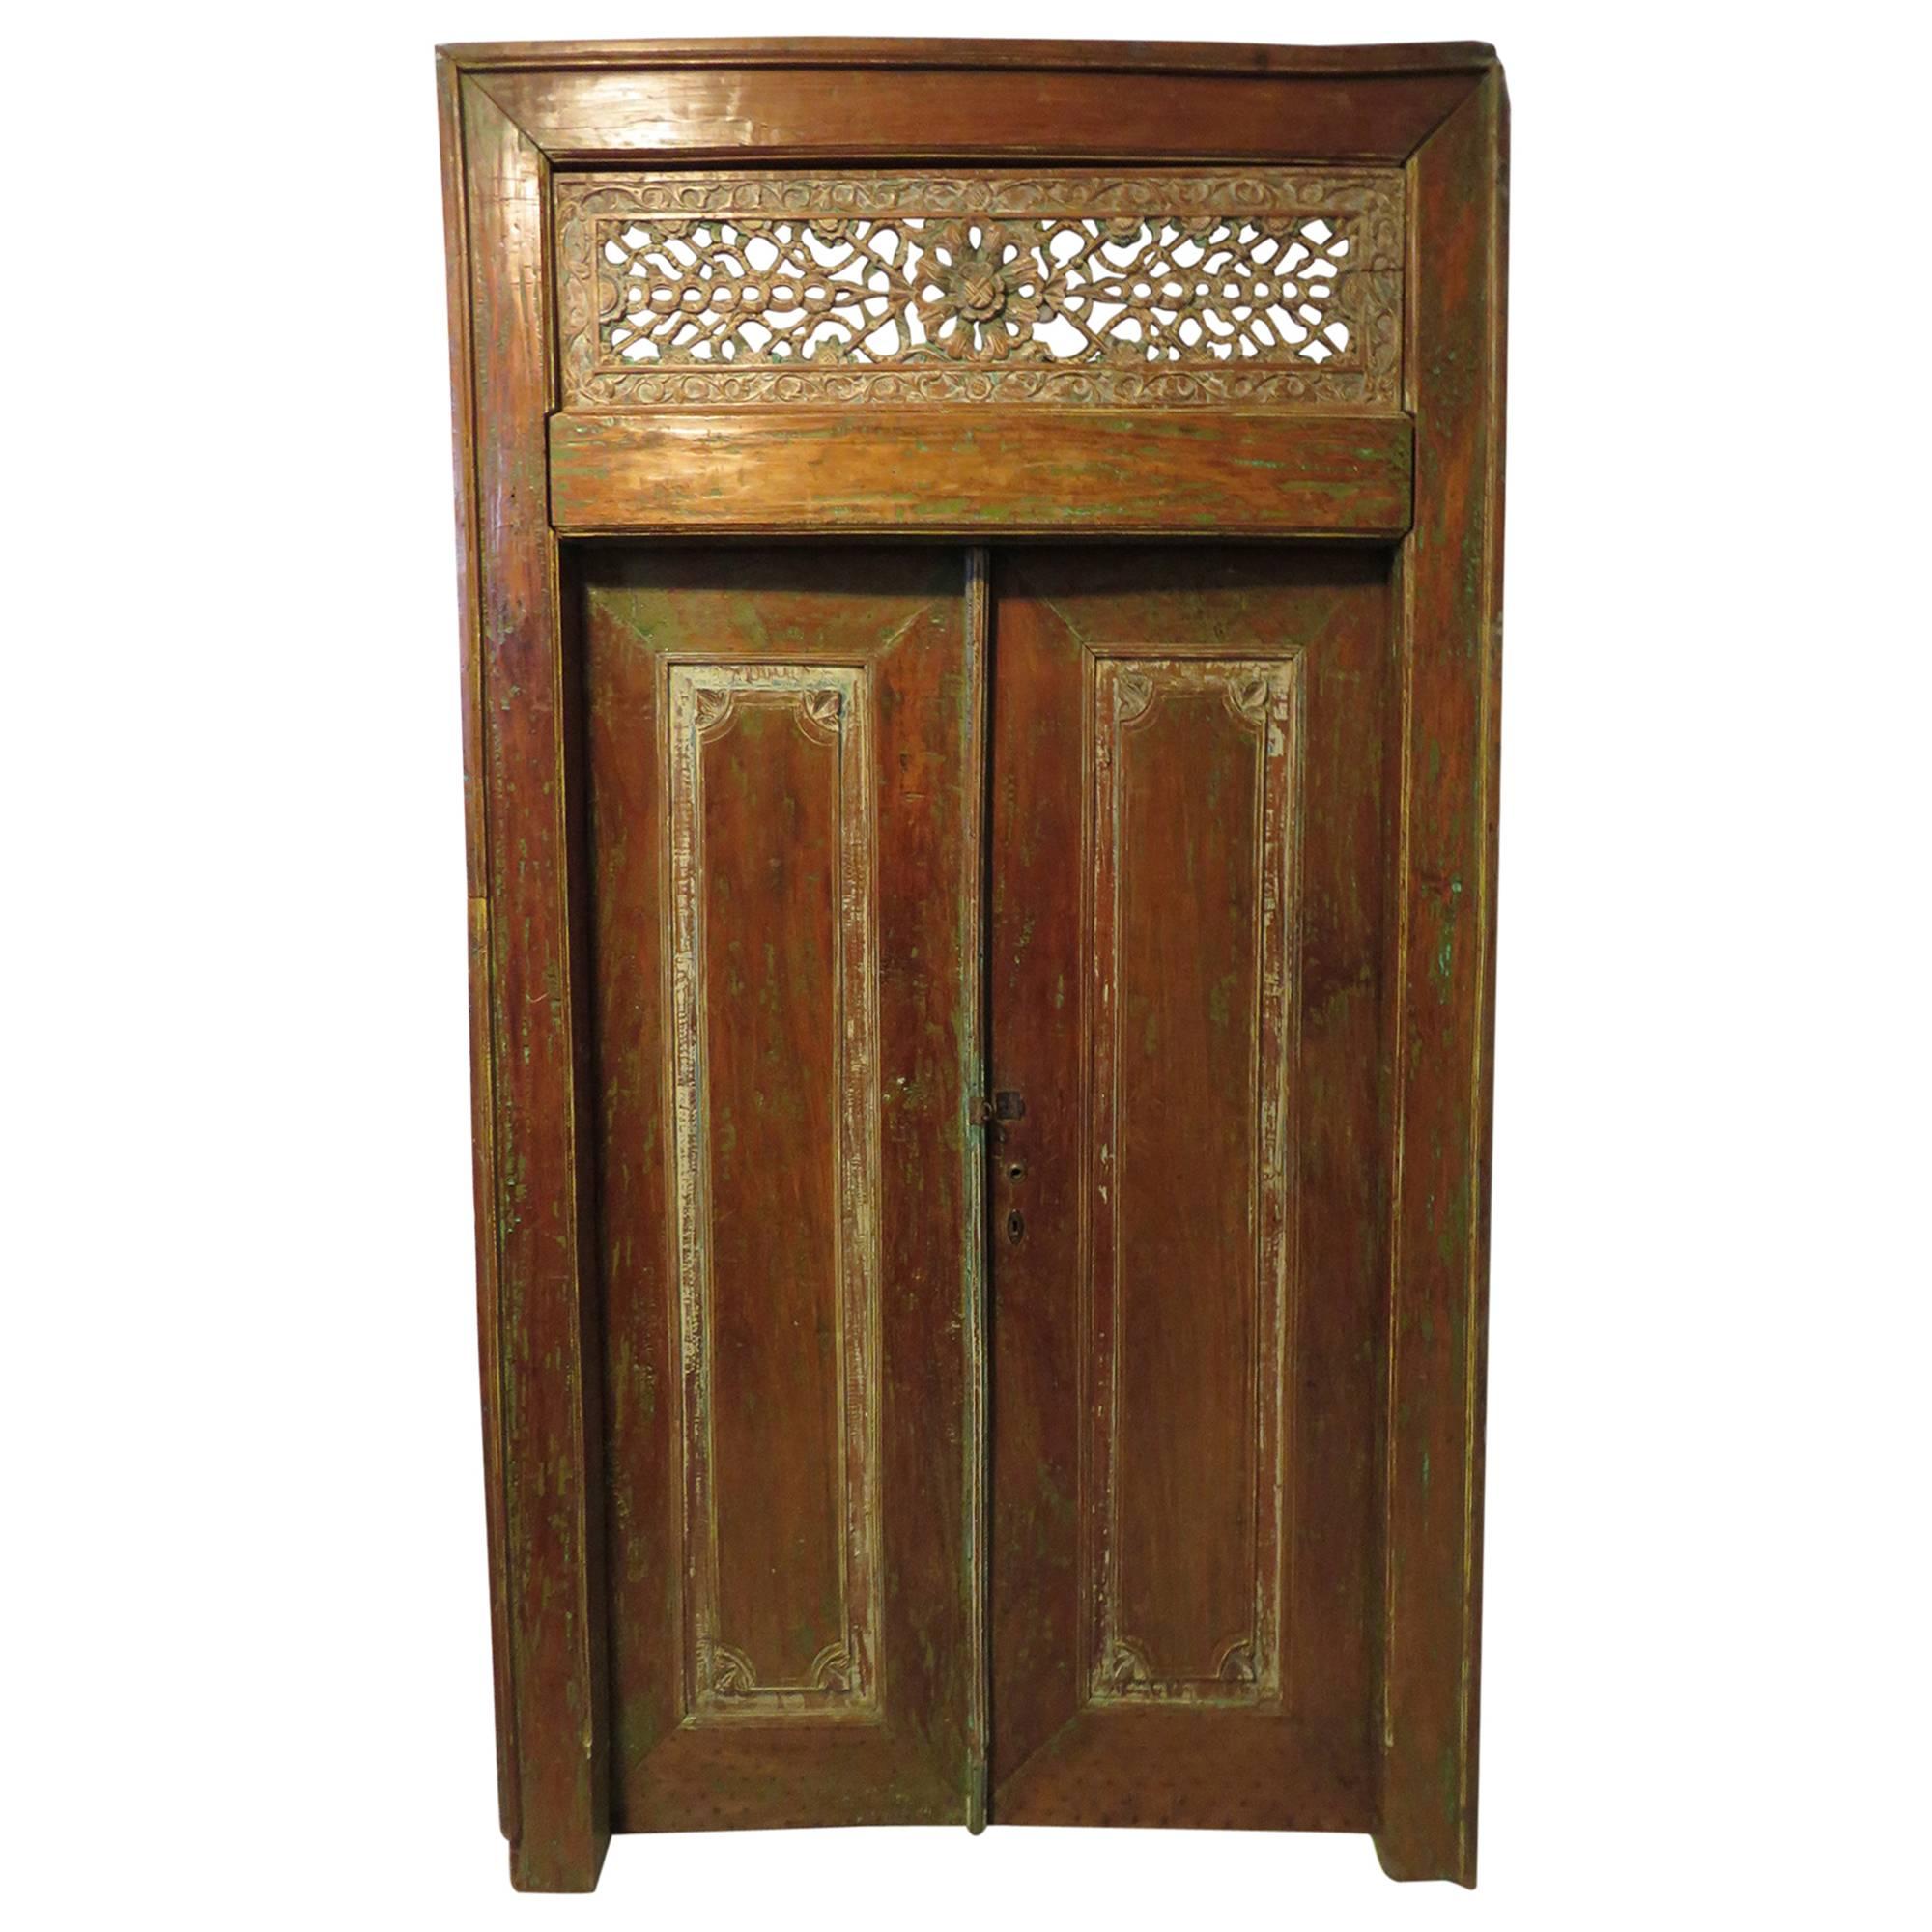 Antique Carved Double Doors or Paneling Beautifully Patinated Wood 19th Century For Sale